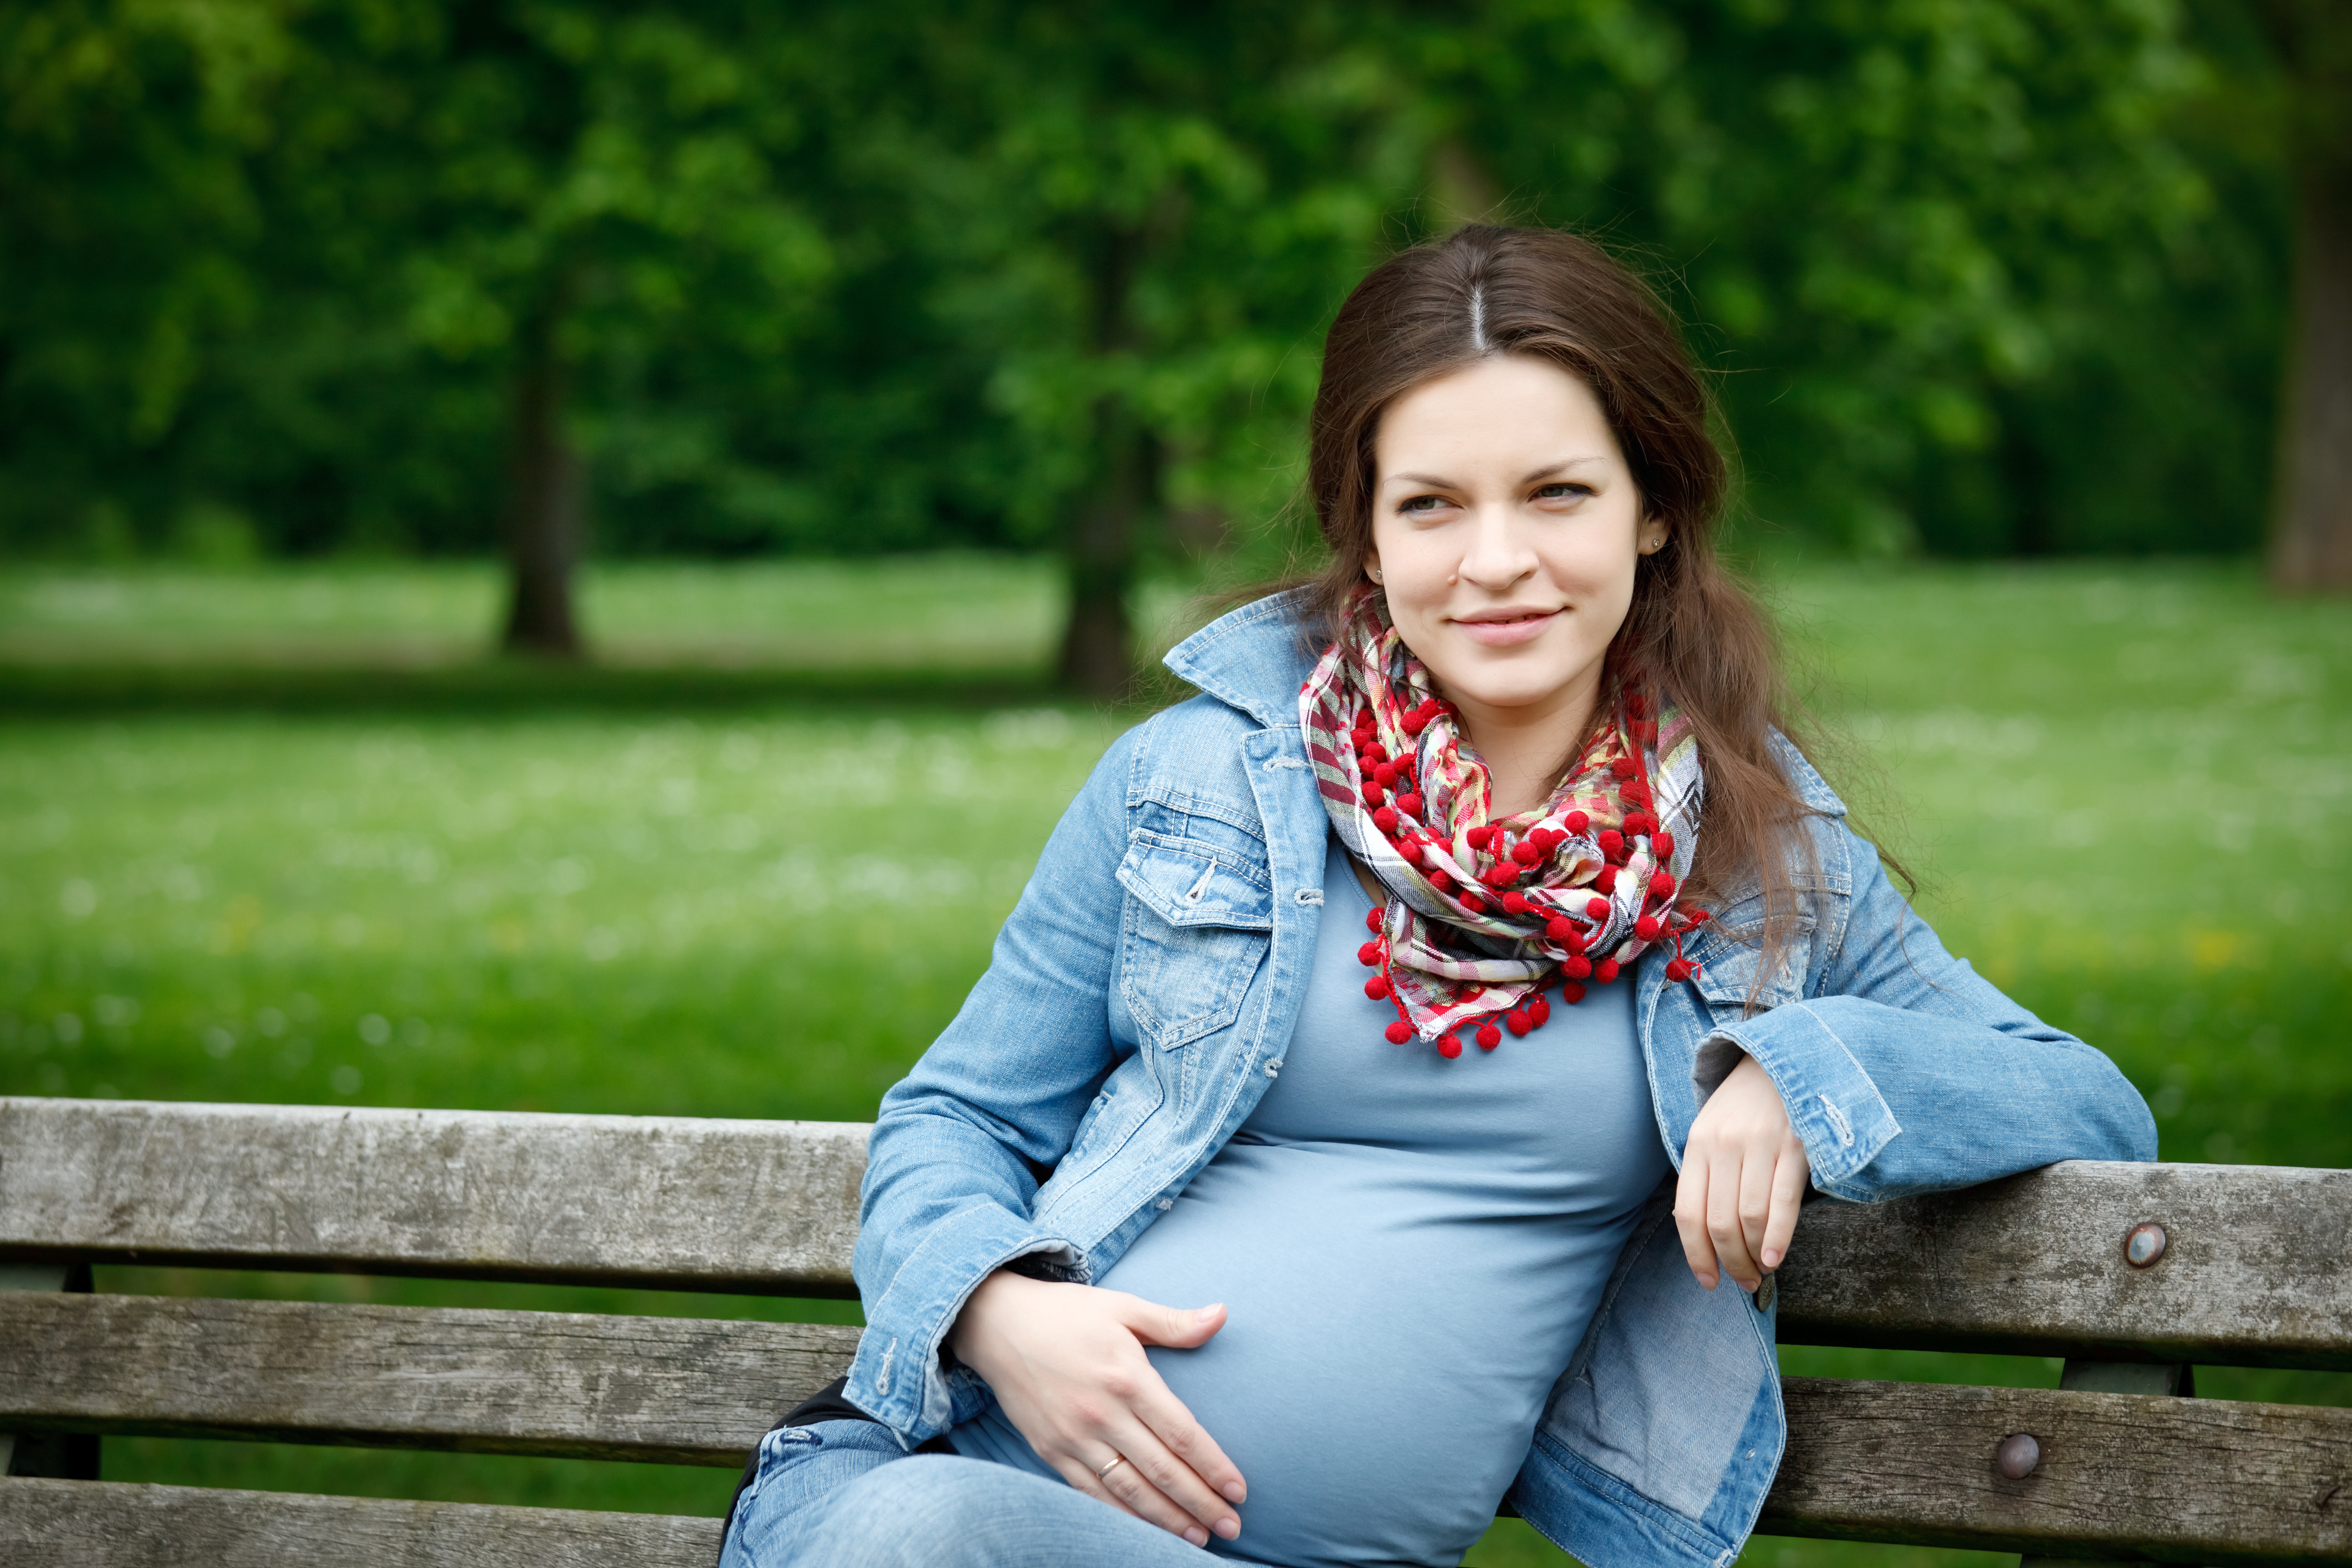 What to Do If You Have Strep Throat While Pregnant